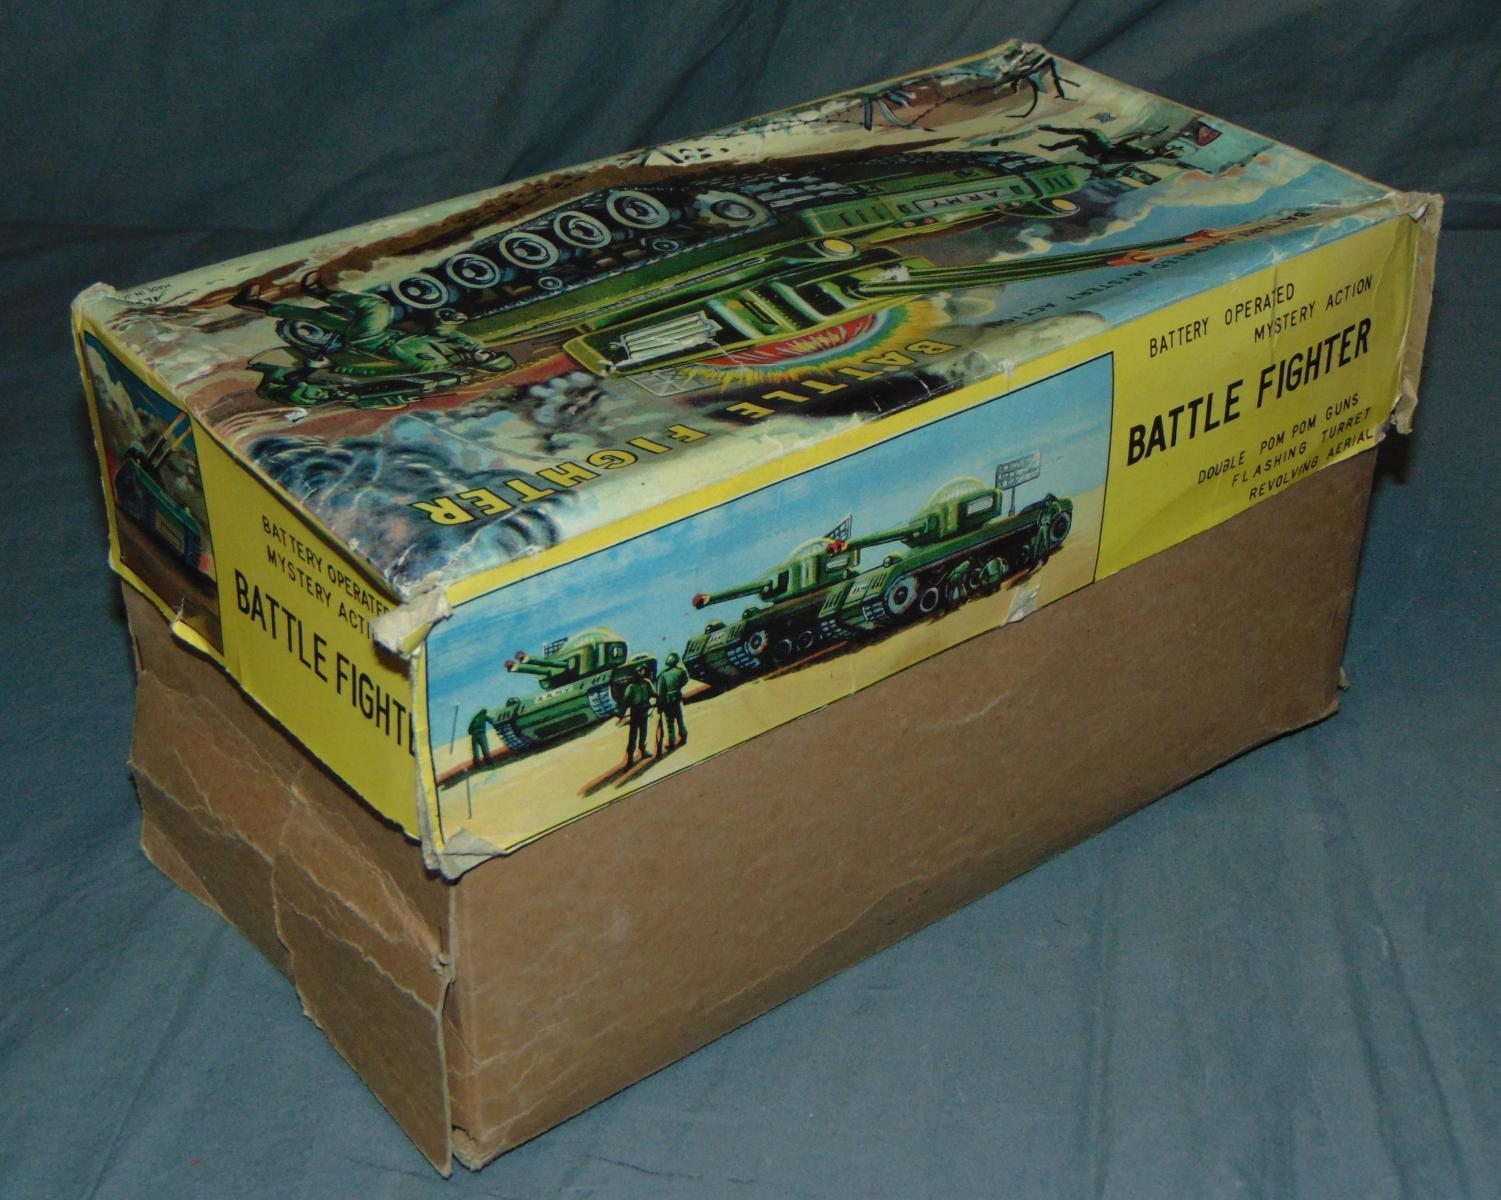 Battery Operated Battle Fighter Tank.